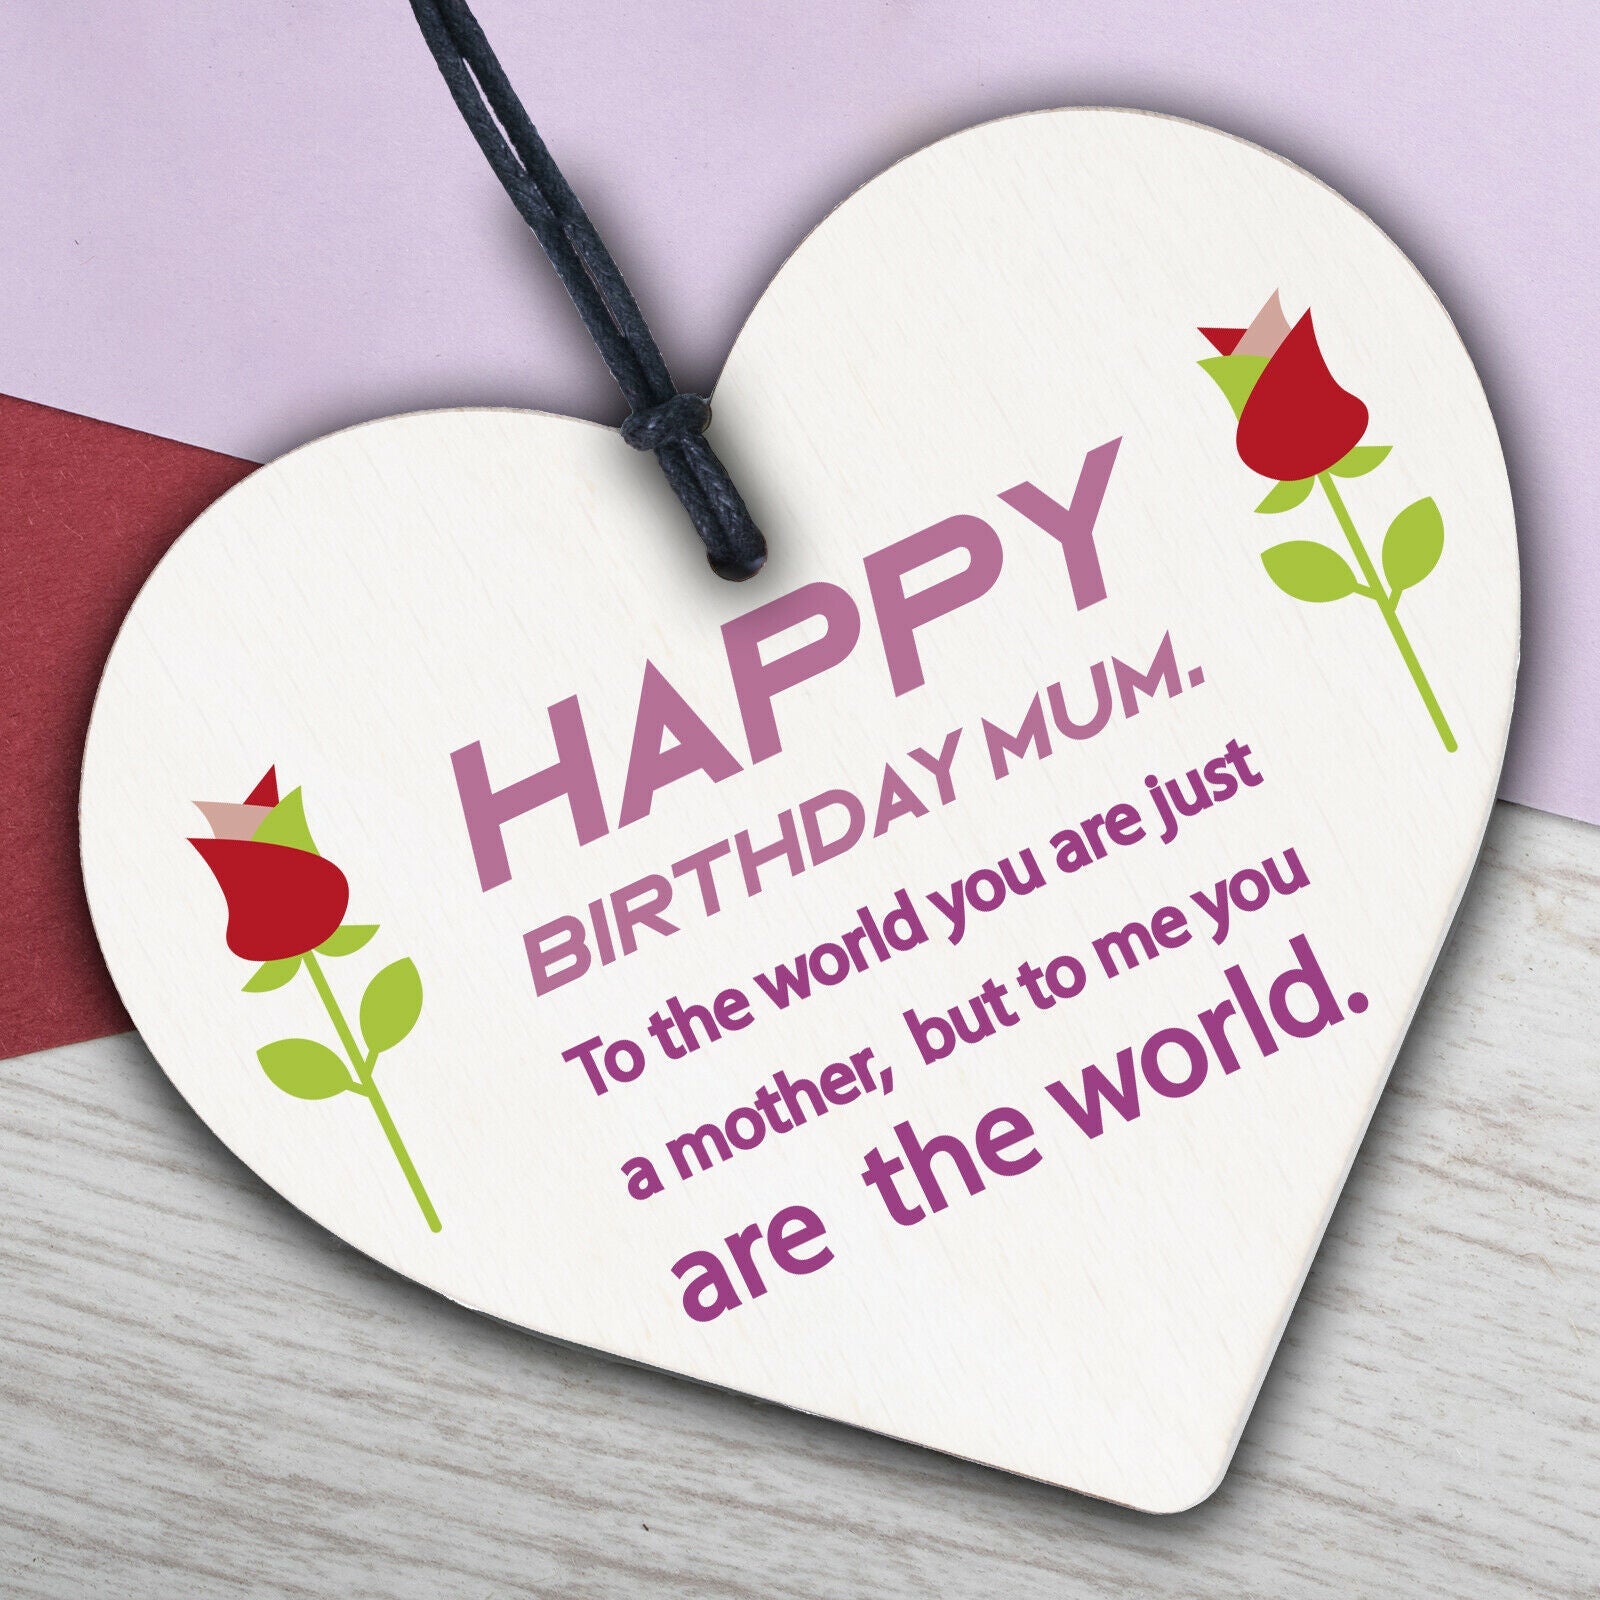 Happy Birthday Mum Heart Mummy Funny Special Card Baby Son Daughter Love Gifts